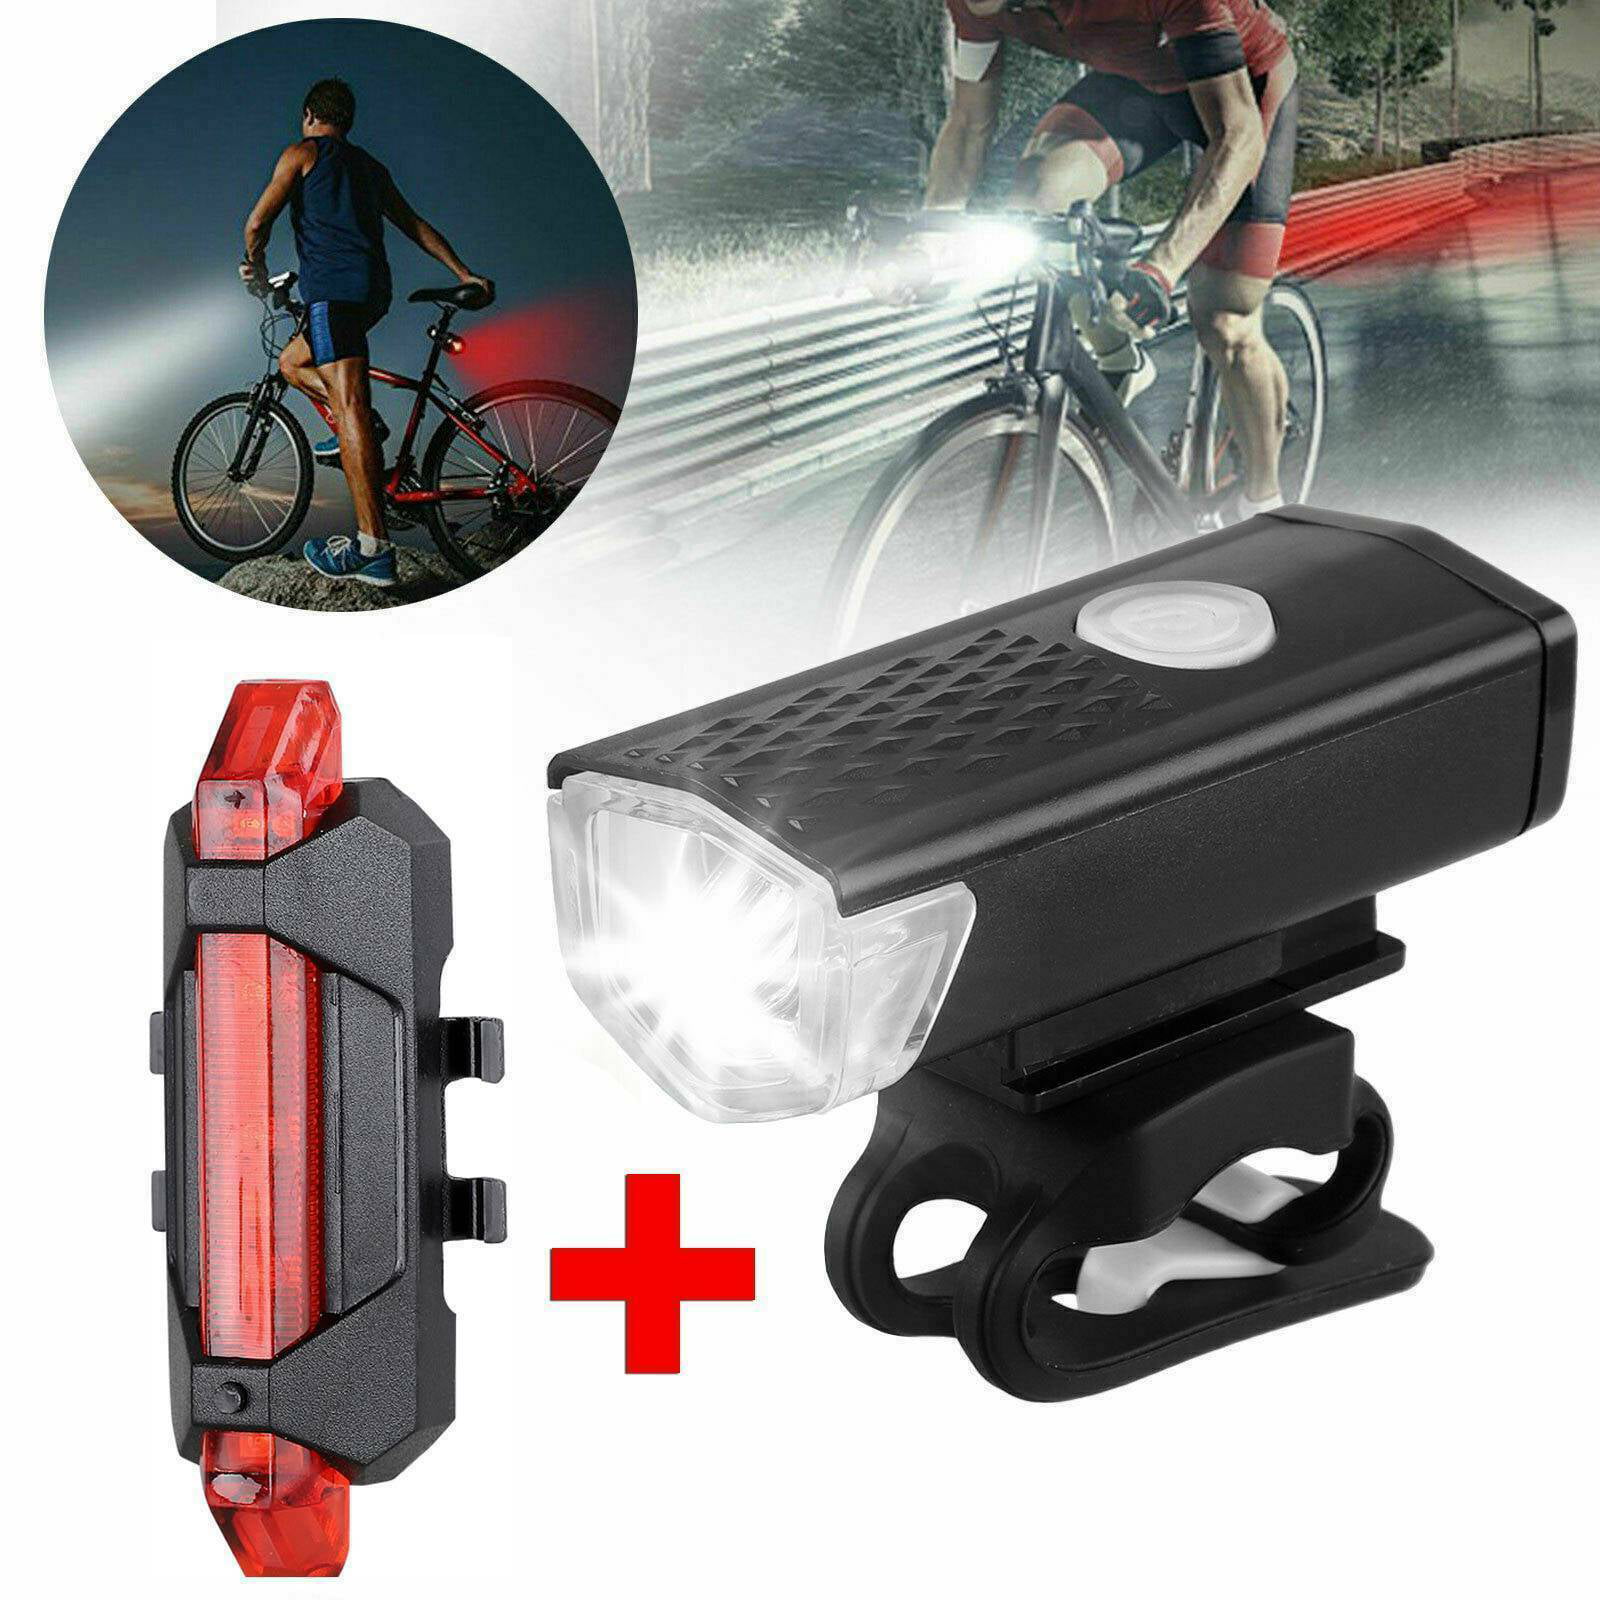 Details about   CYCLING Top Front Bicycle LED Light MTB Road Bike Headlight Light USB Charging 